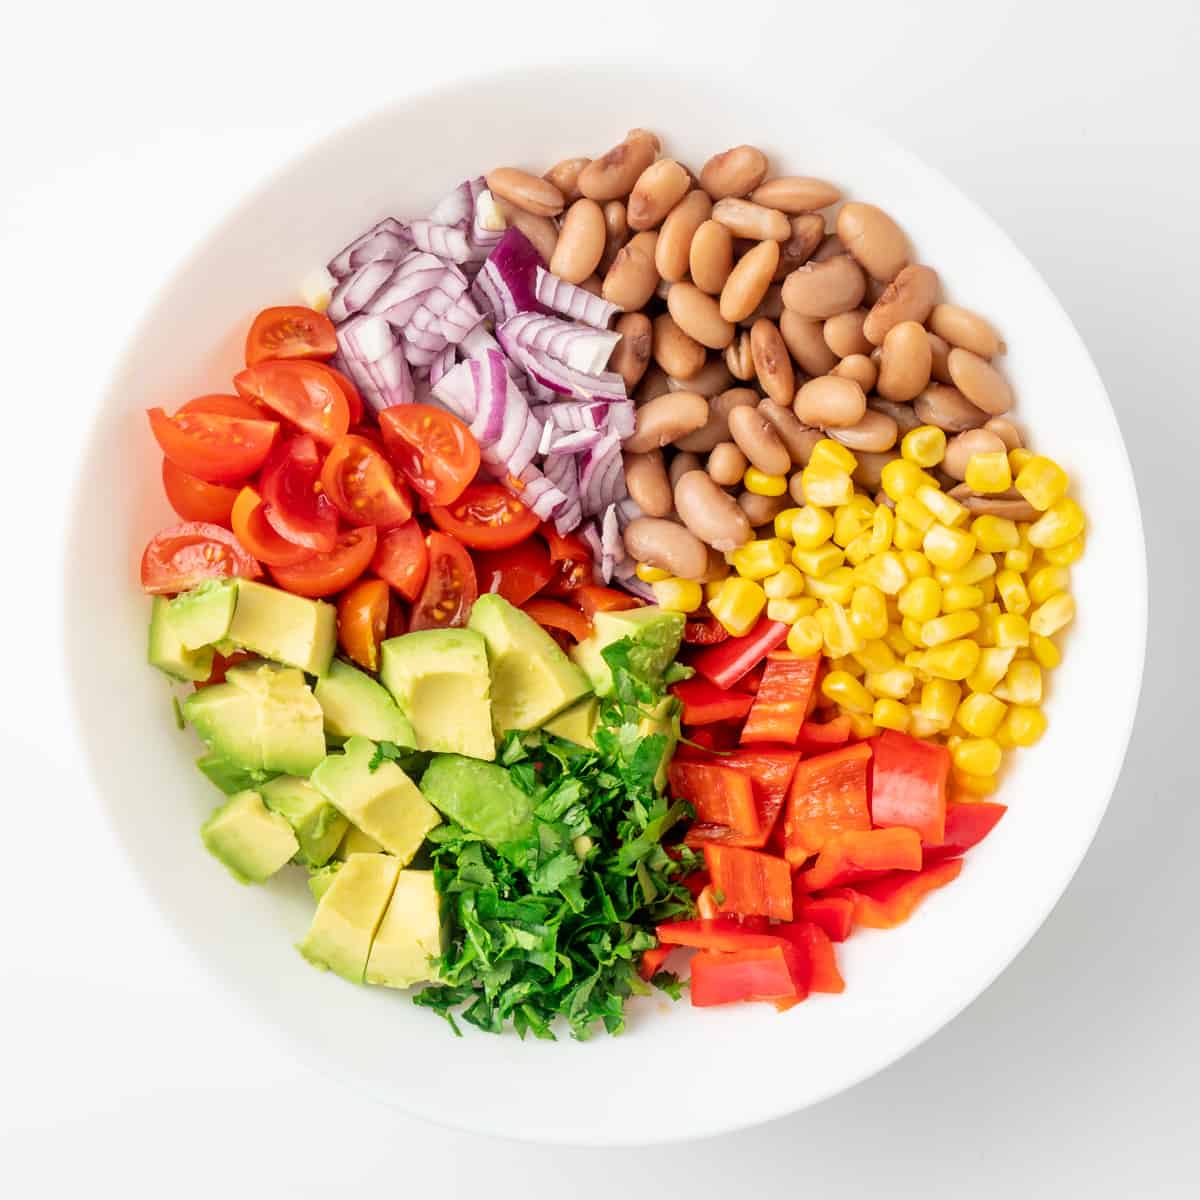 The beans and vegetables making up the bulk of the salad are placed in a salad bowl.